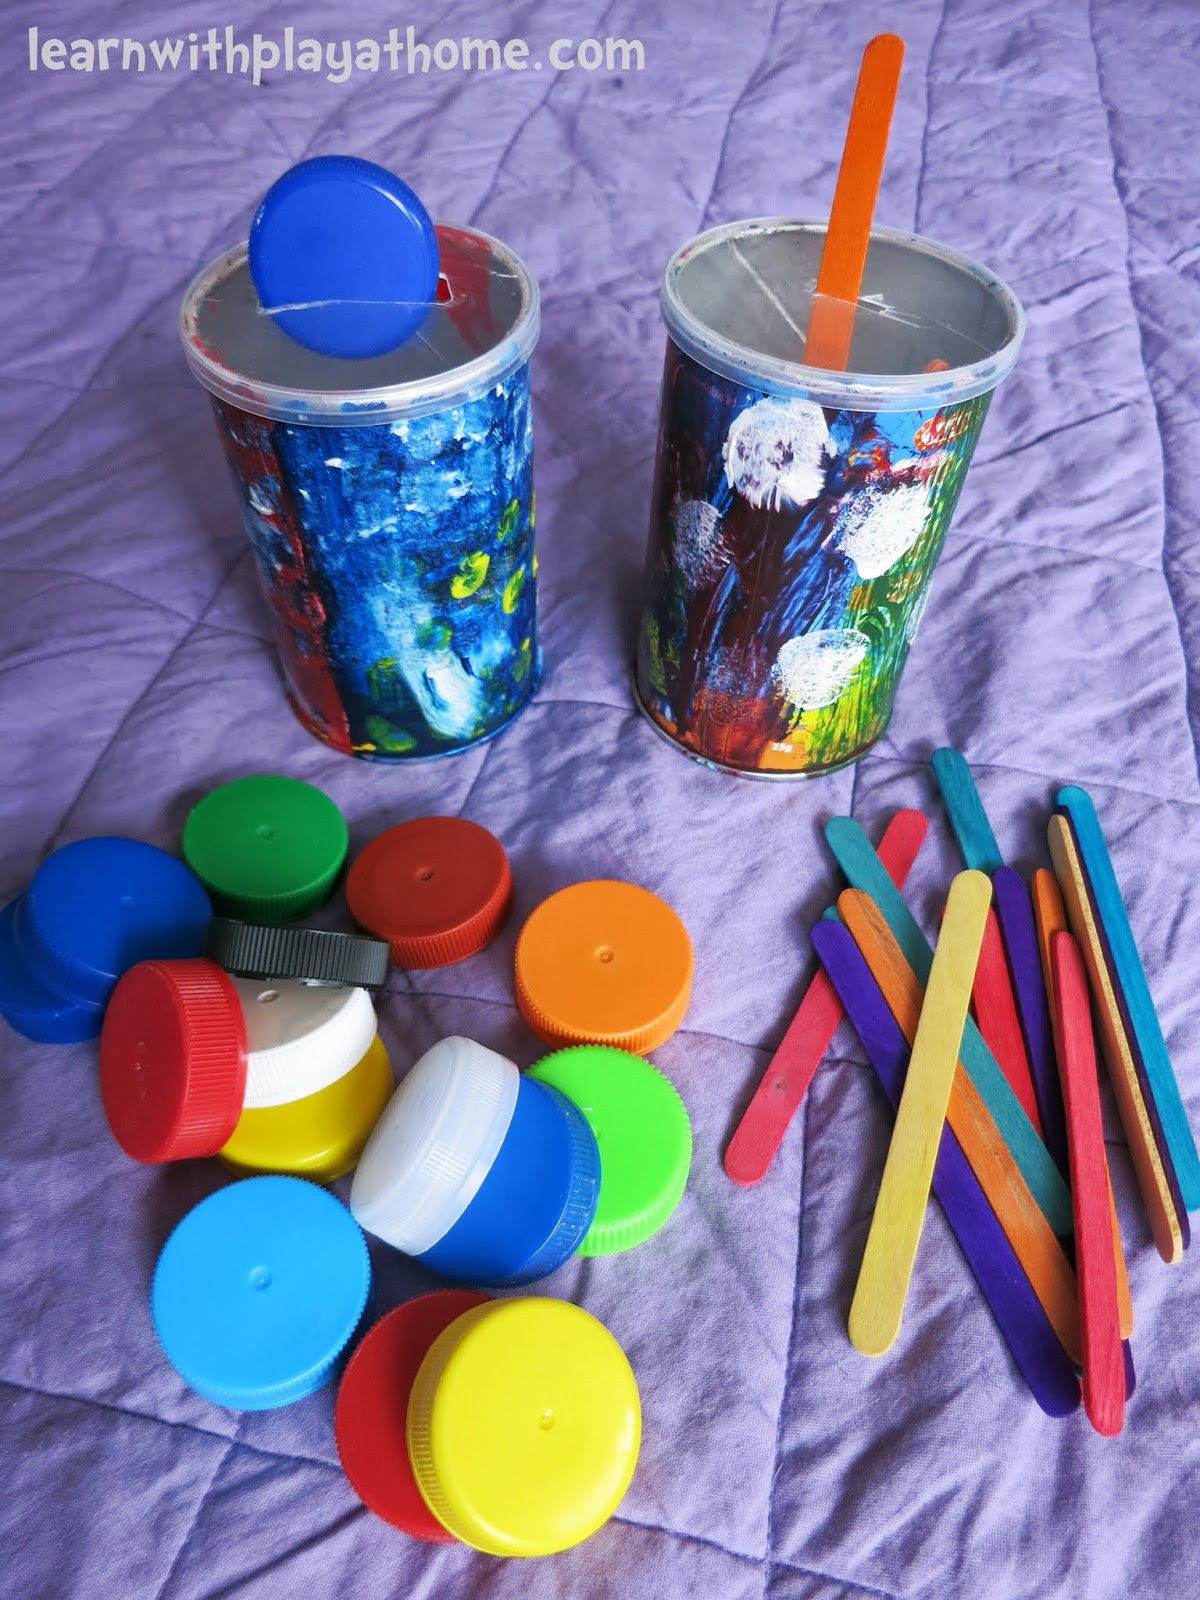 DIY Projects For Toddlers
 Learn with Play at Home DIY Fine Motor Activity for